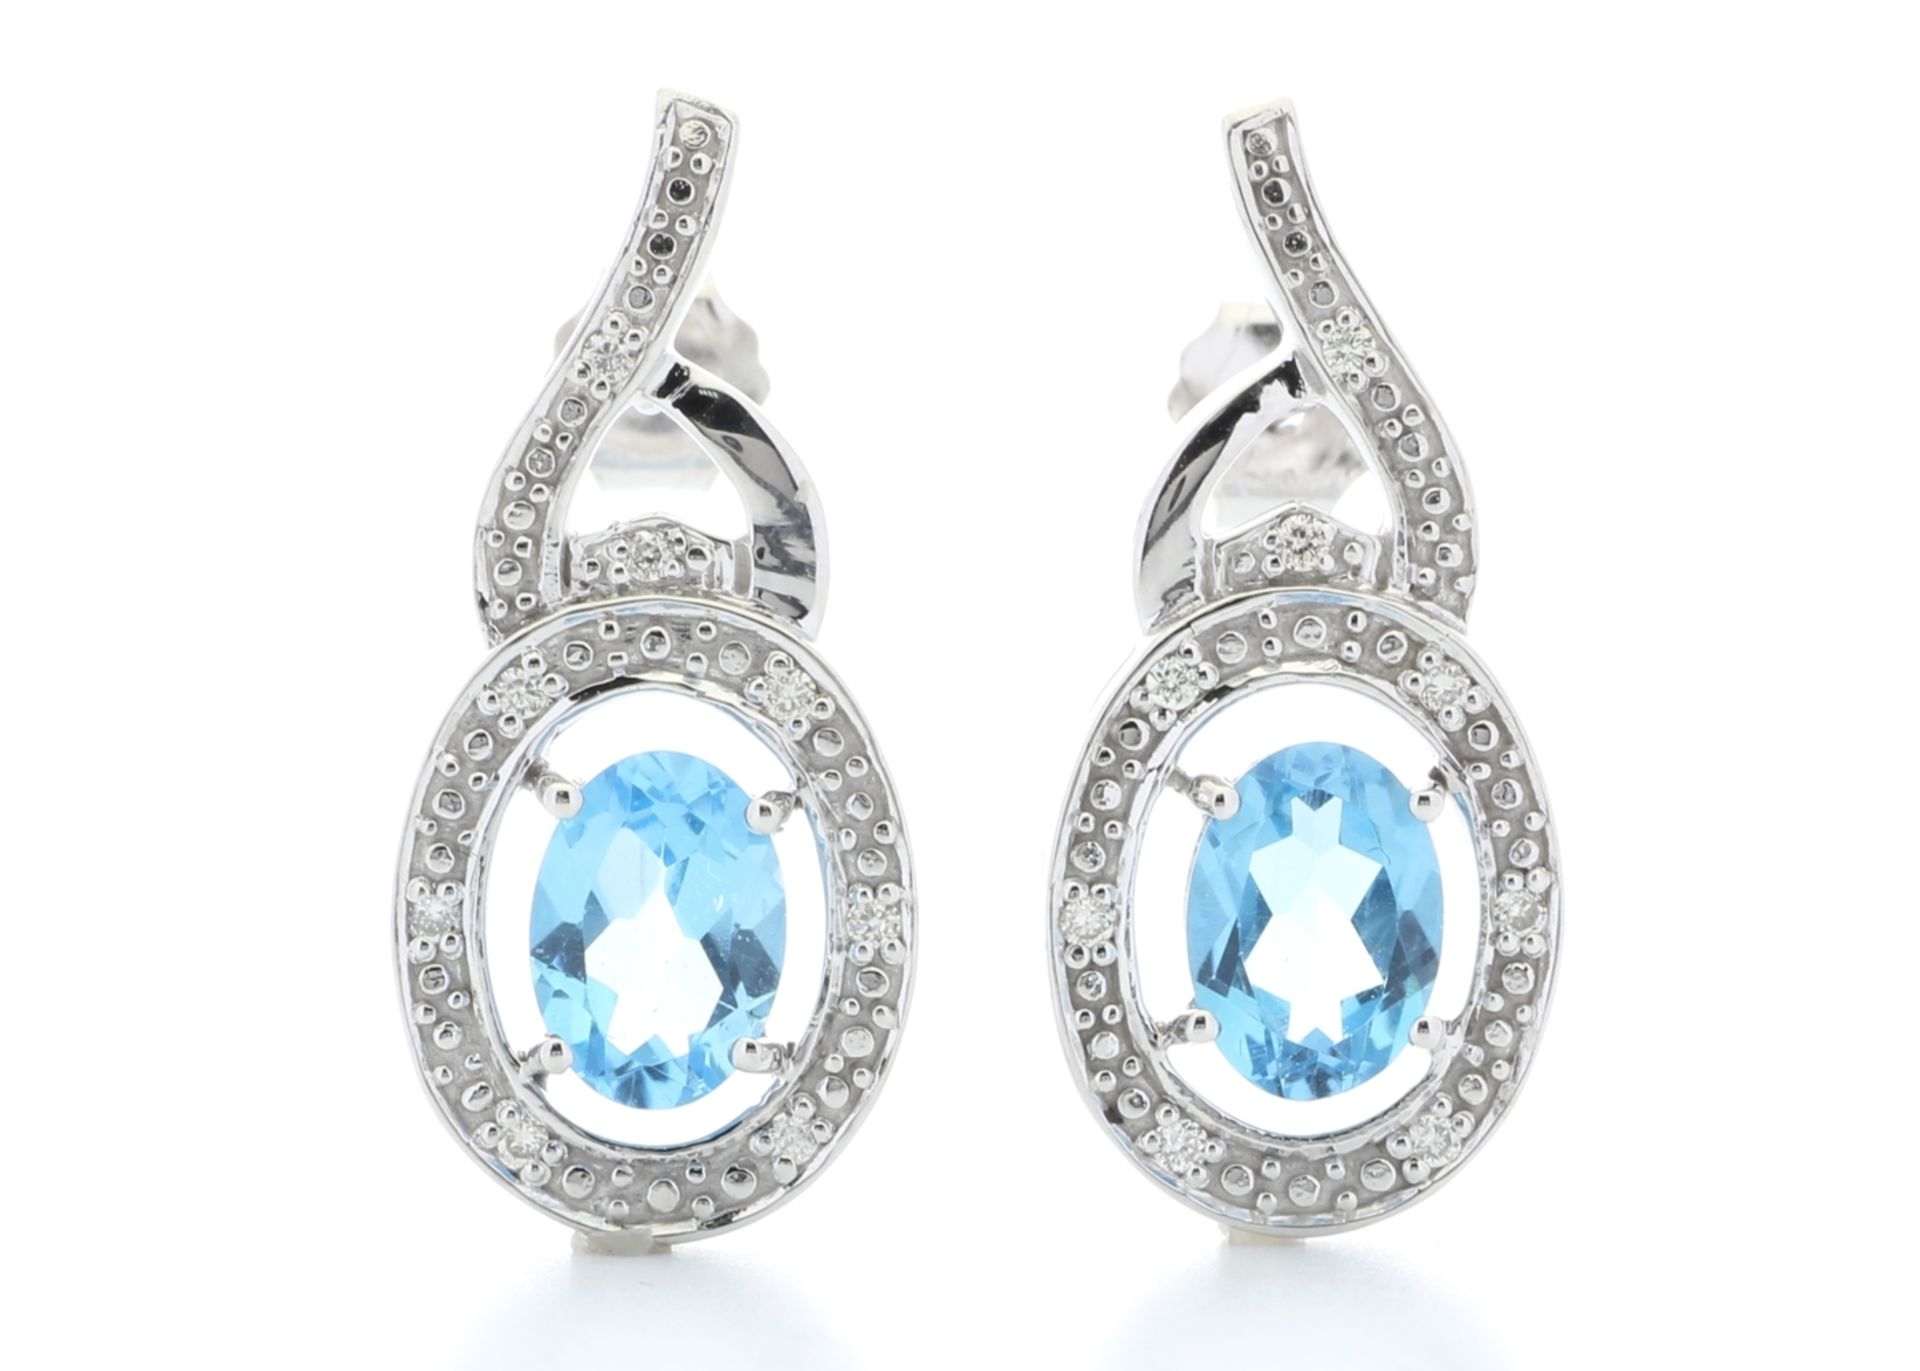 9ct White Gold Diamond And Blue Topaz Earring (BT1.69) 0.05 Carats - Valued By GIE £2,195.00 - A